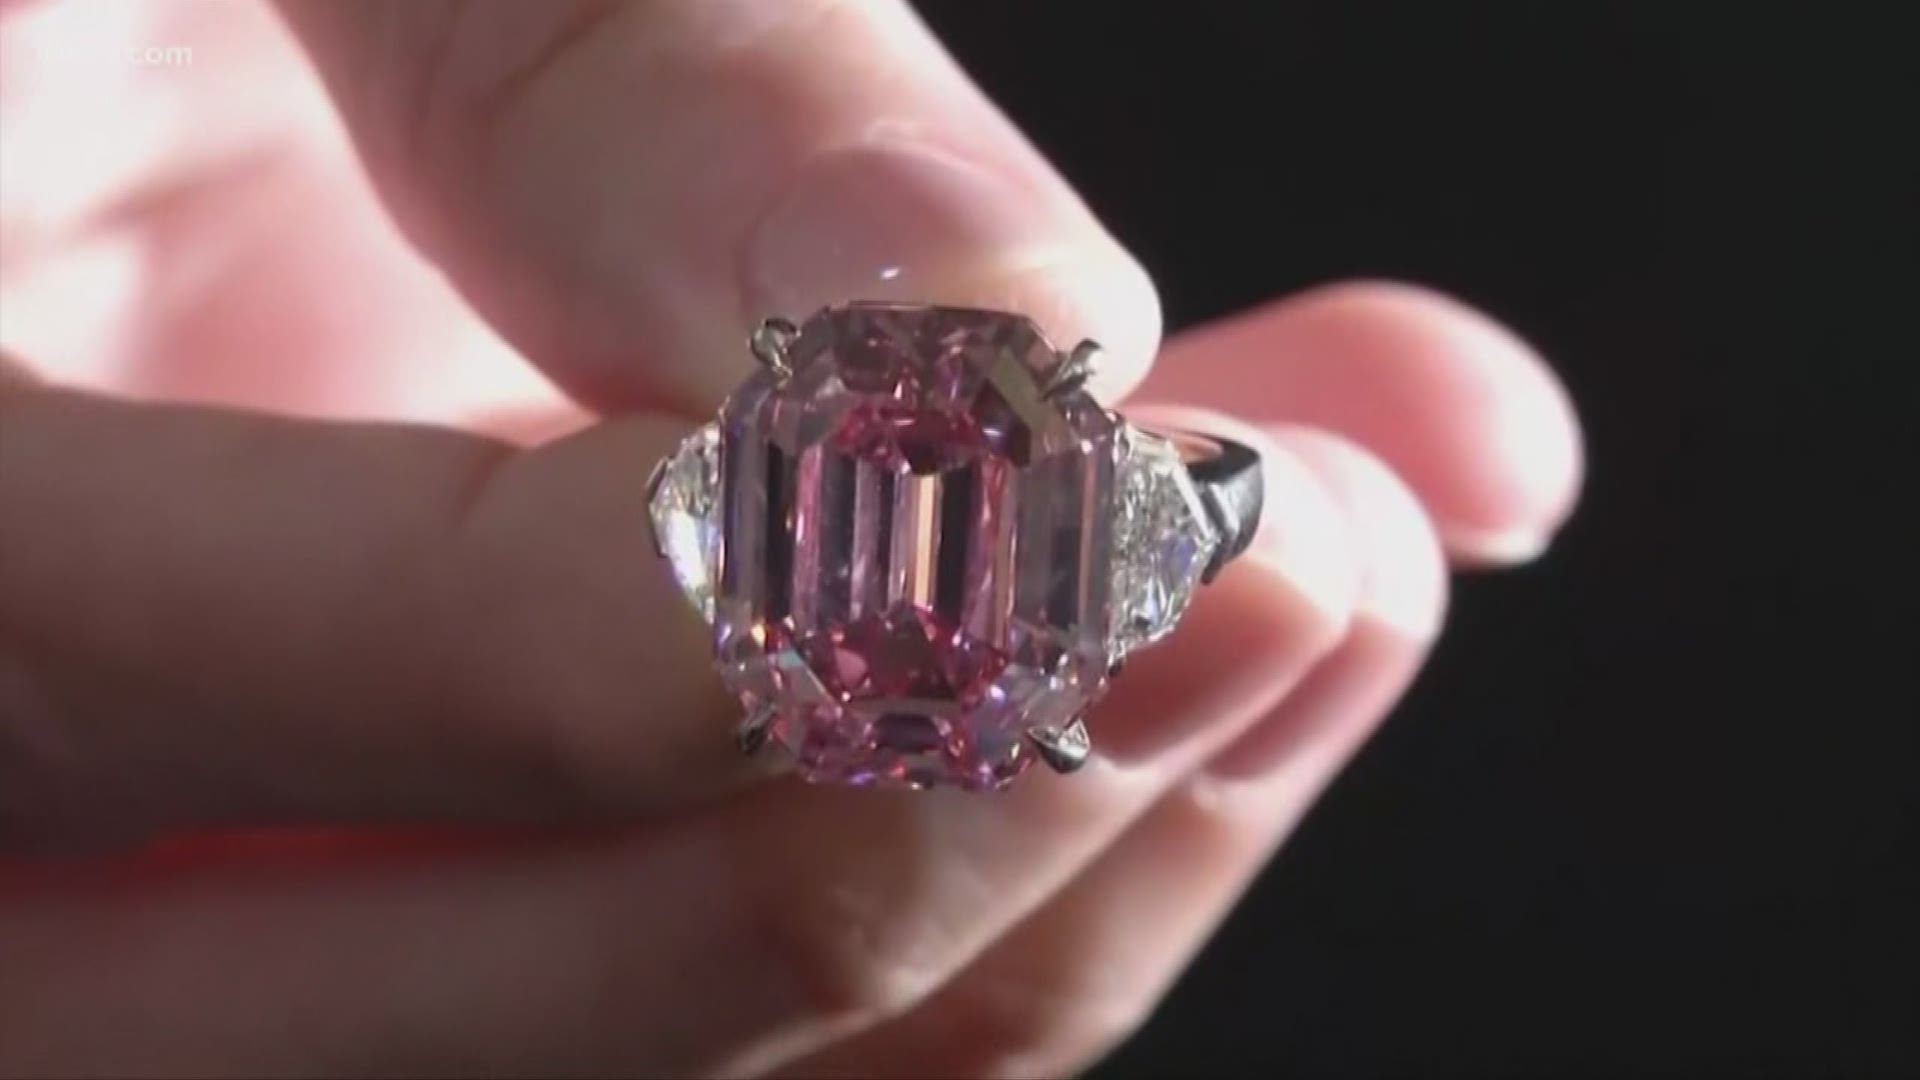 Christie's sold a 19-karat pink diamond at auction in Geneva for $50 million.